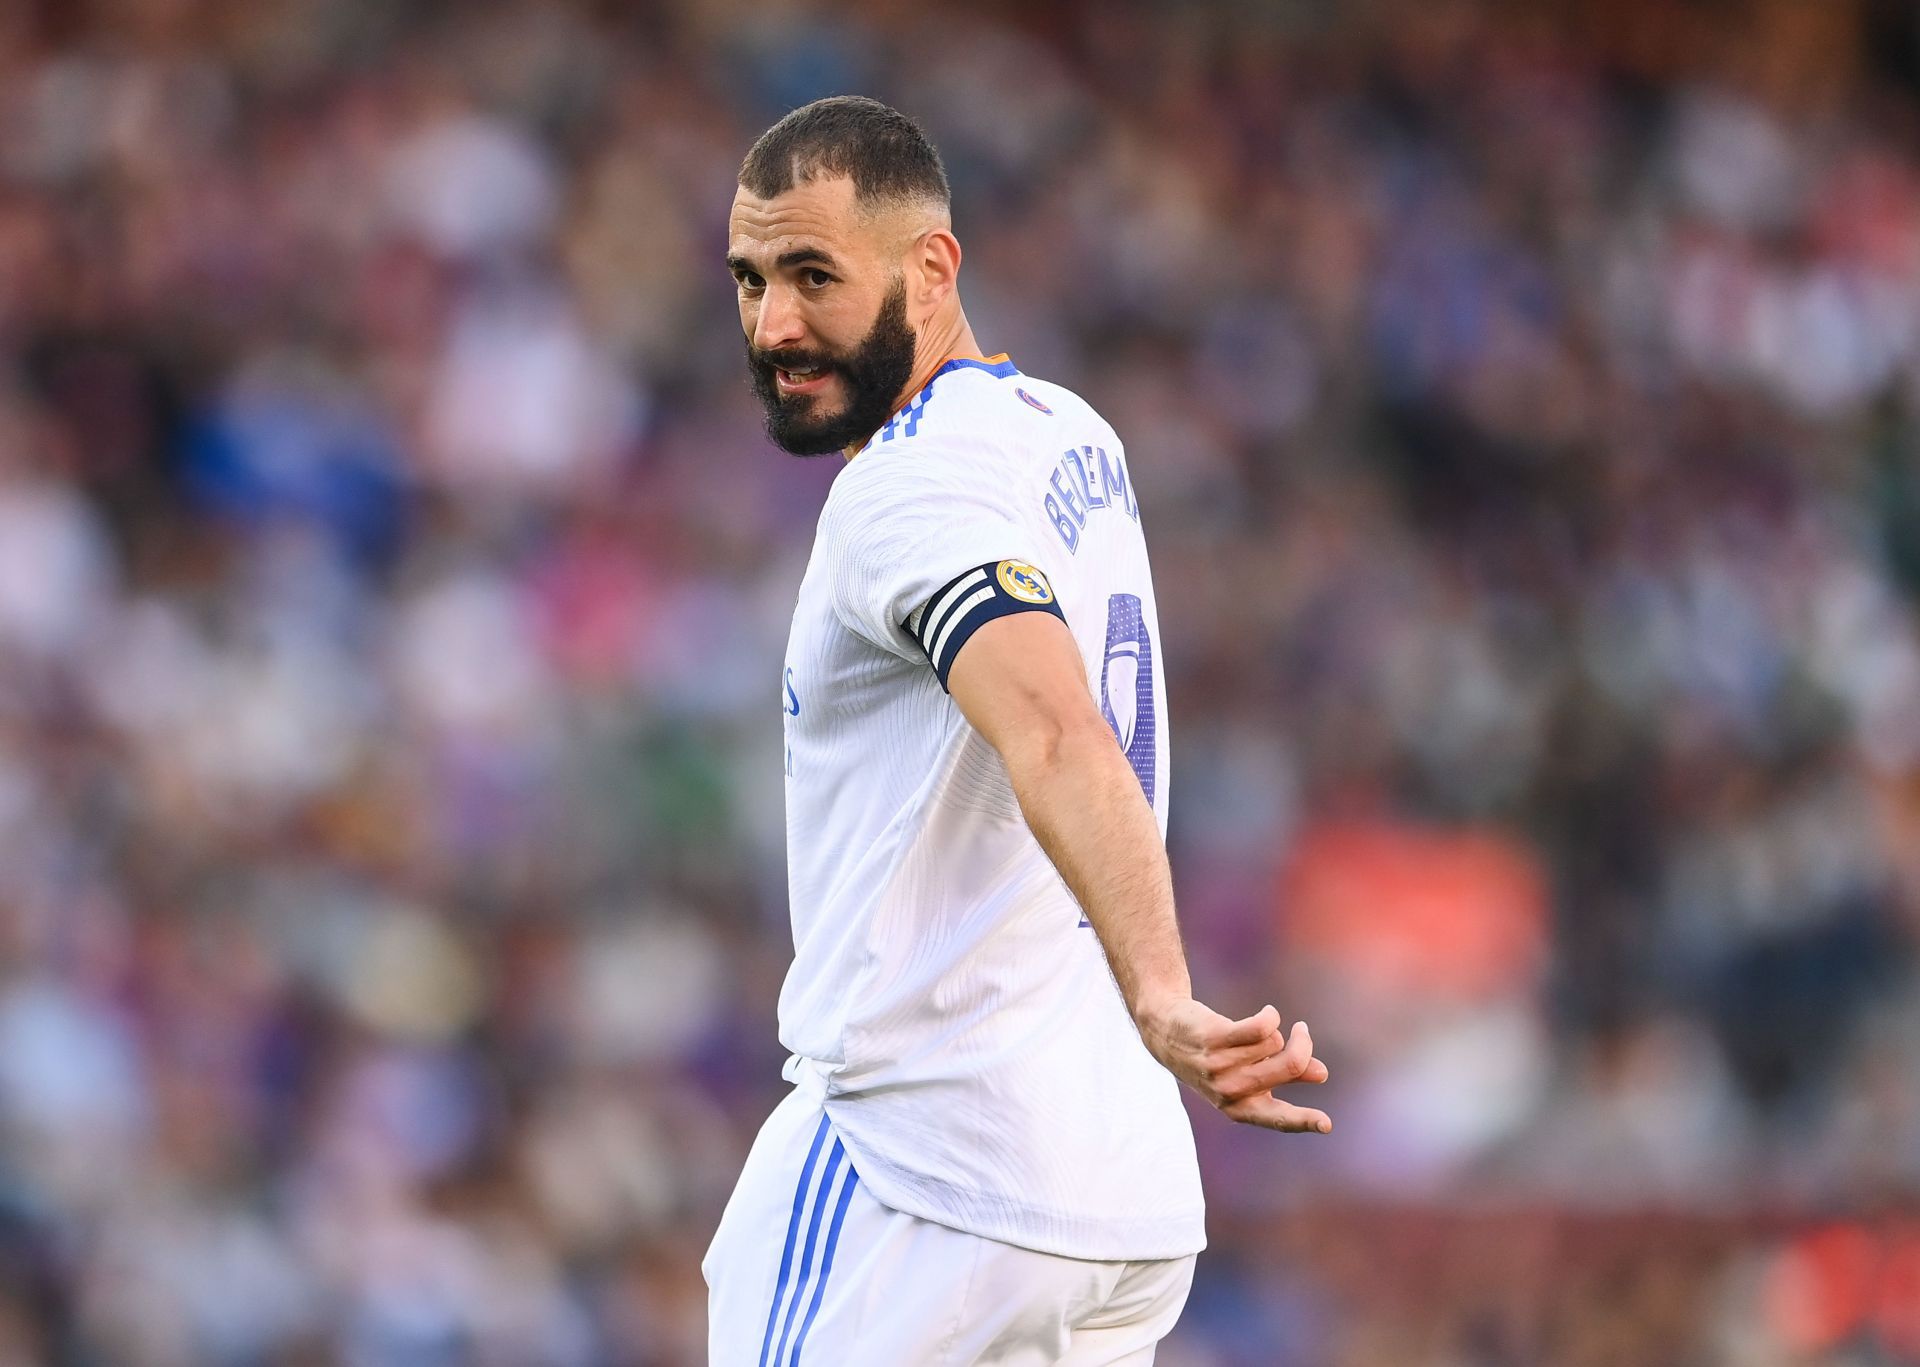 Karim Benzema is one of the top playmakers in La Liga at the moment.